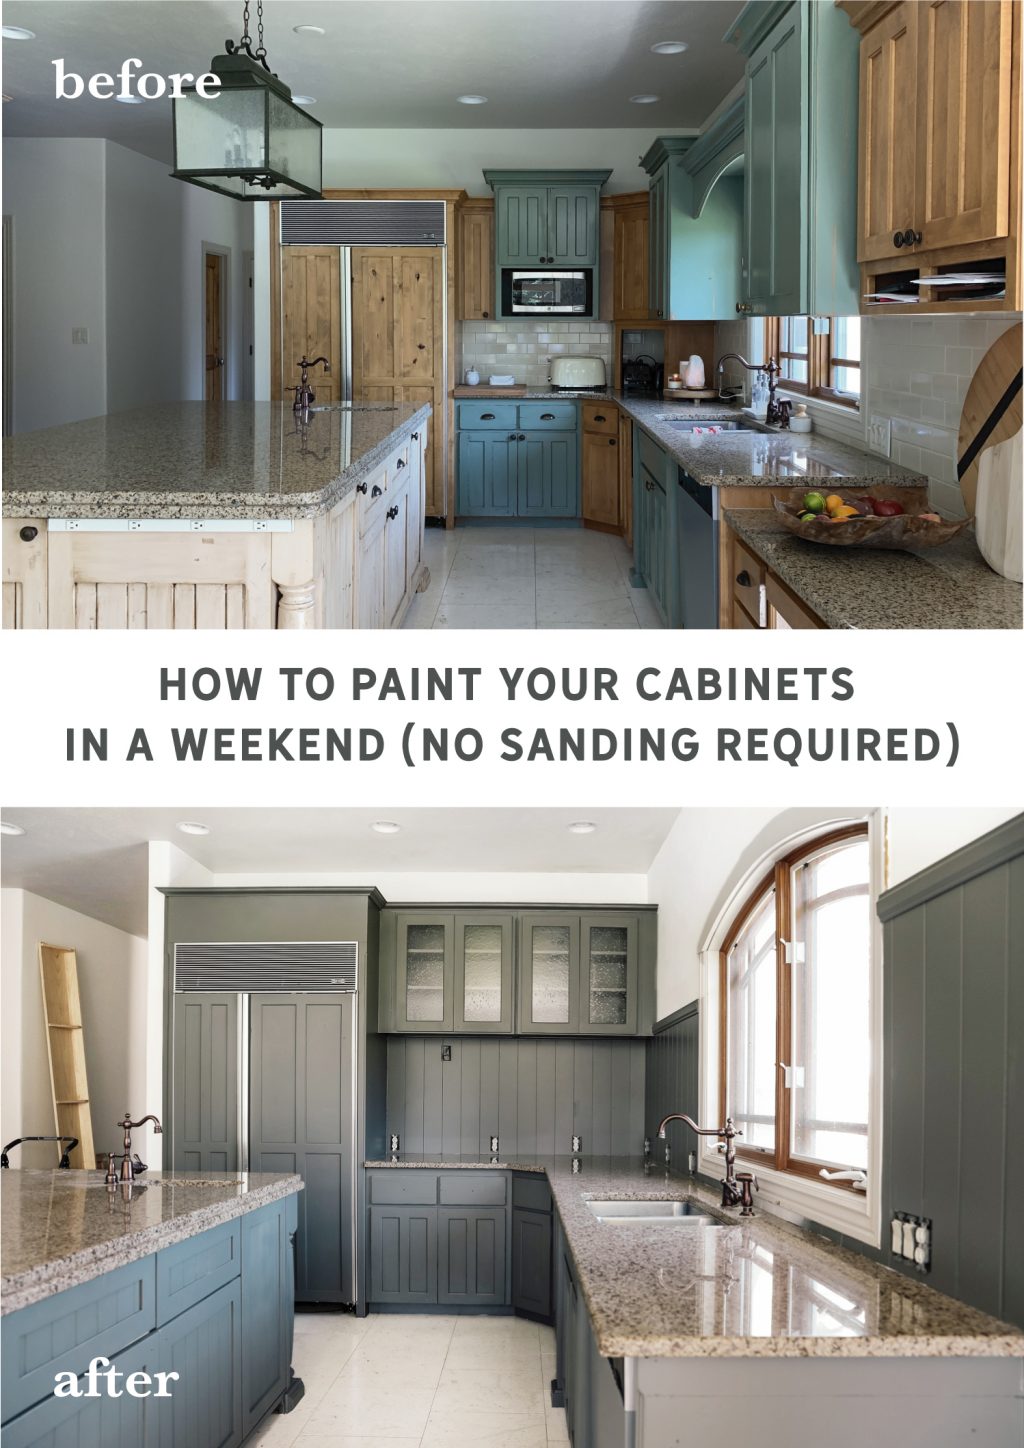 How To Paint Your Cabinets In A Weekend, How To Take Care Of Painted Kitchen Cabinets